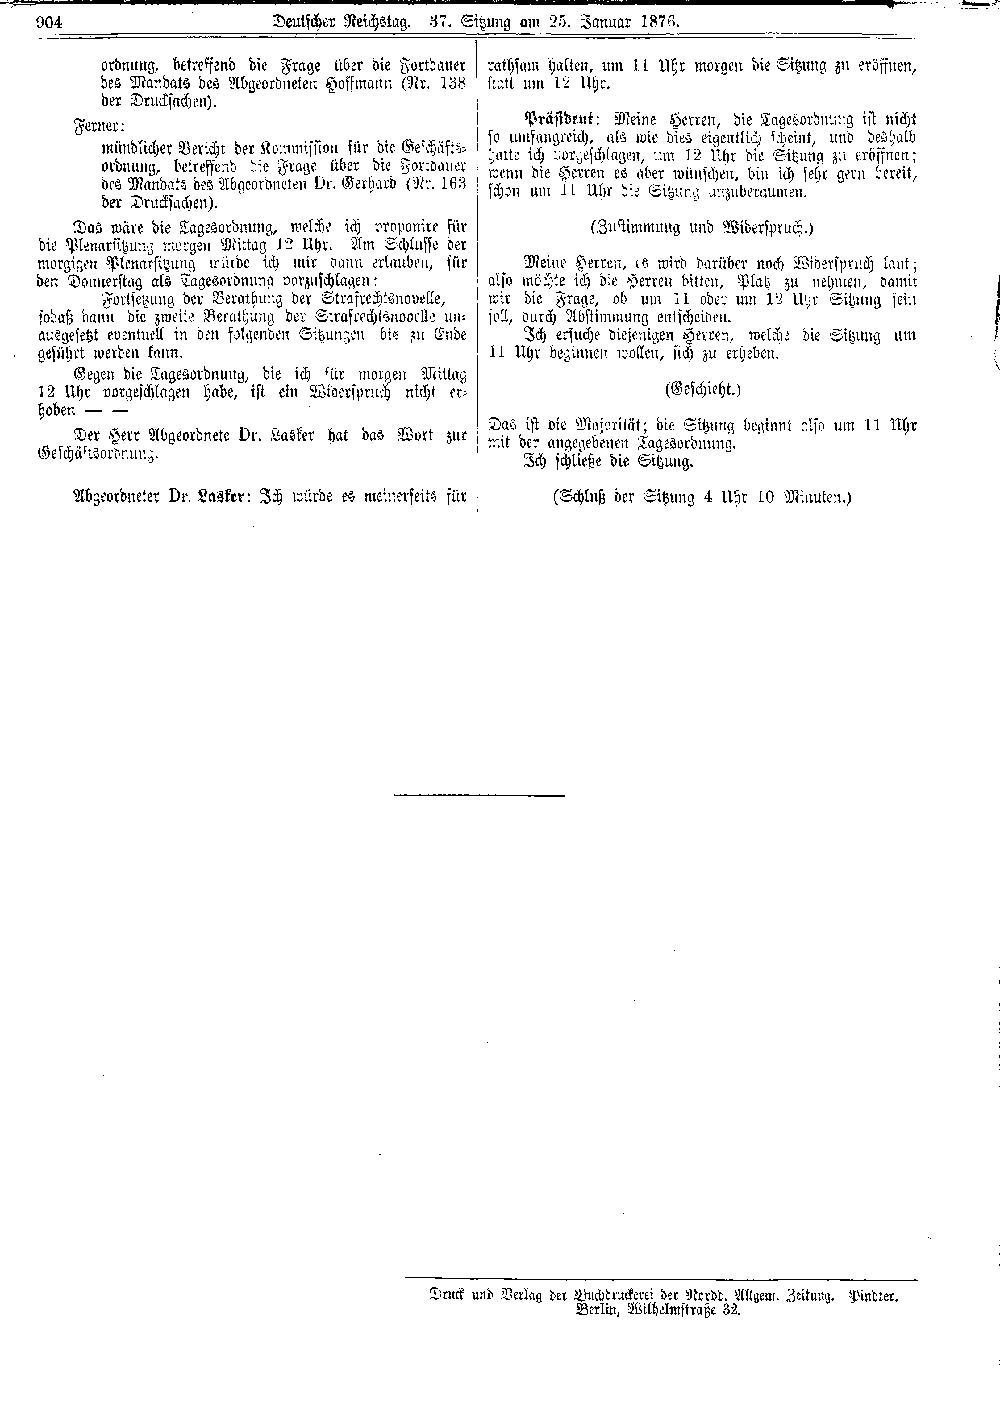 Scan of page 904